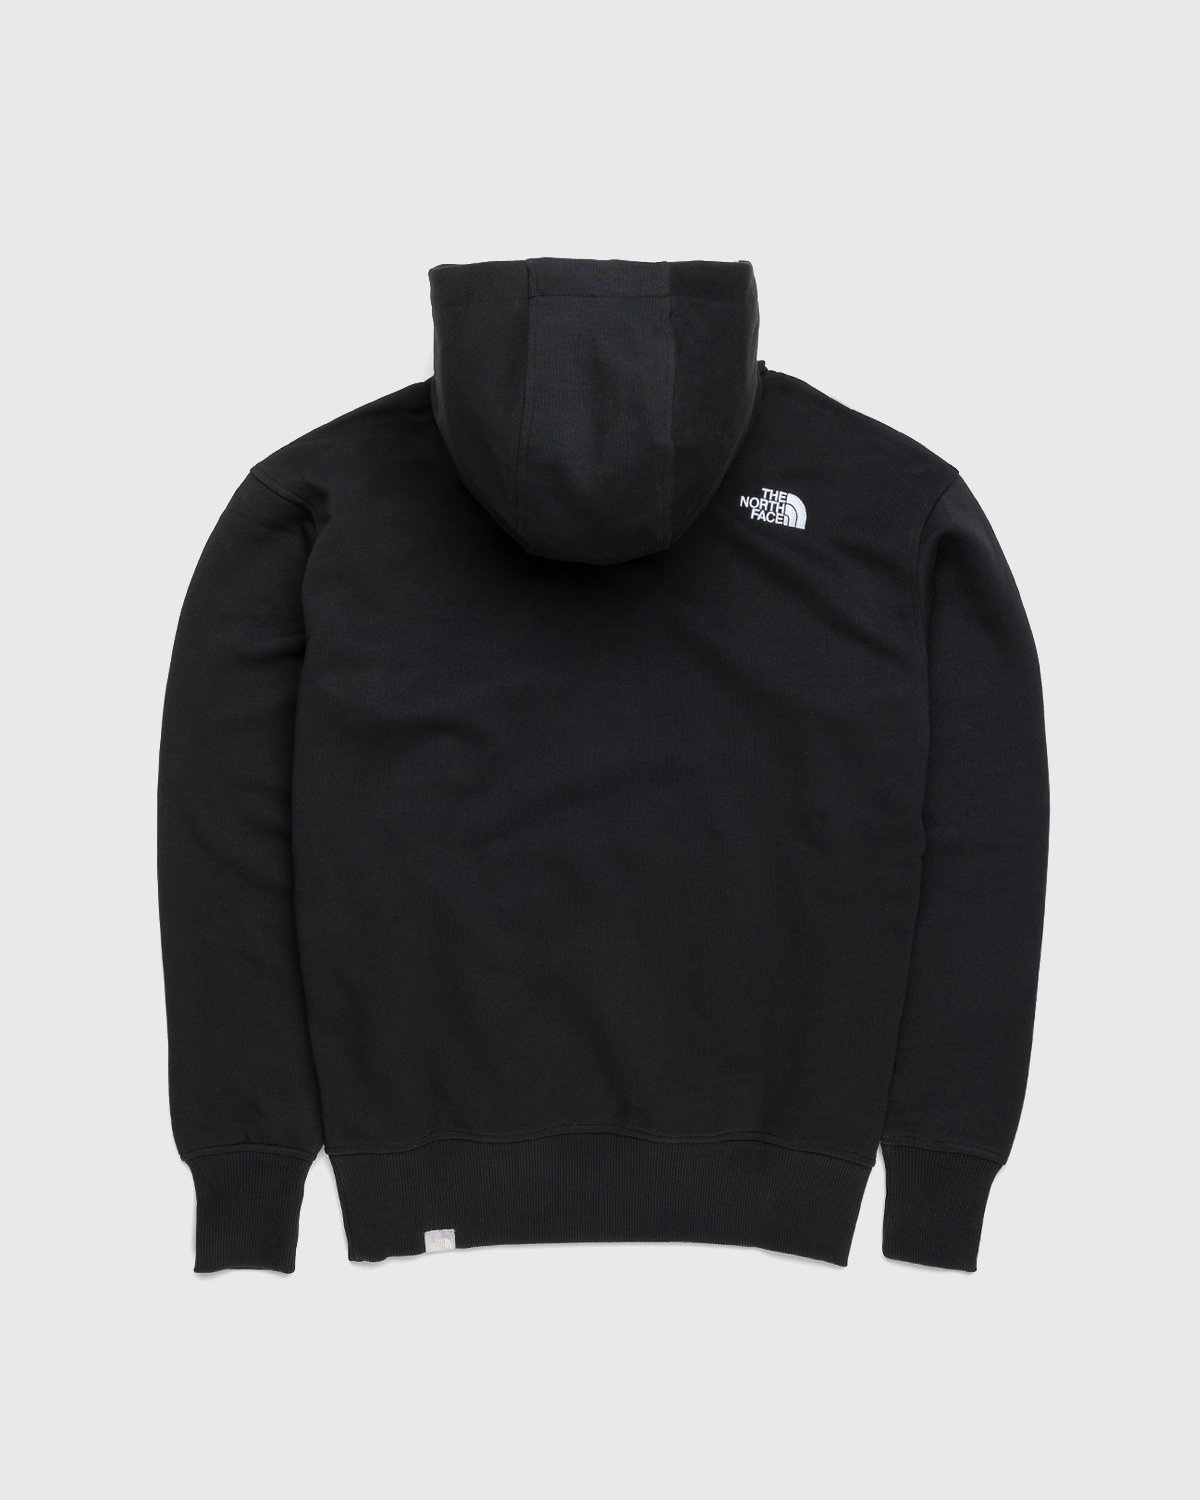 The North Face – Oversized Essential Hoodie Black - Sweats - Black - Image 2